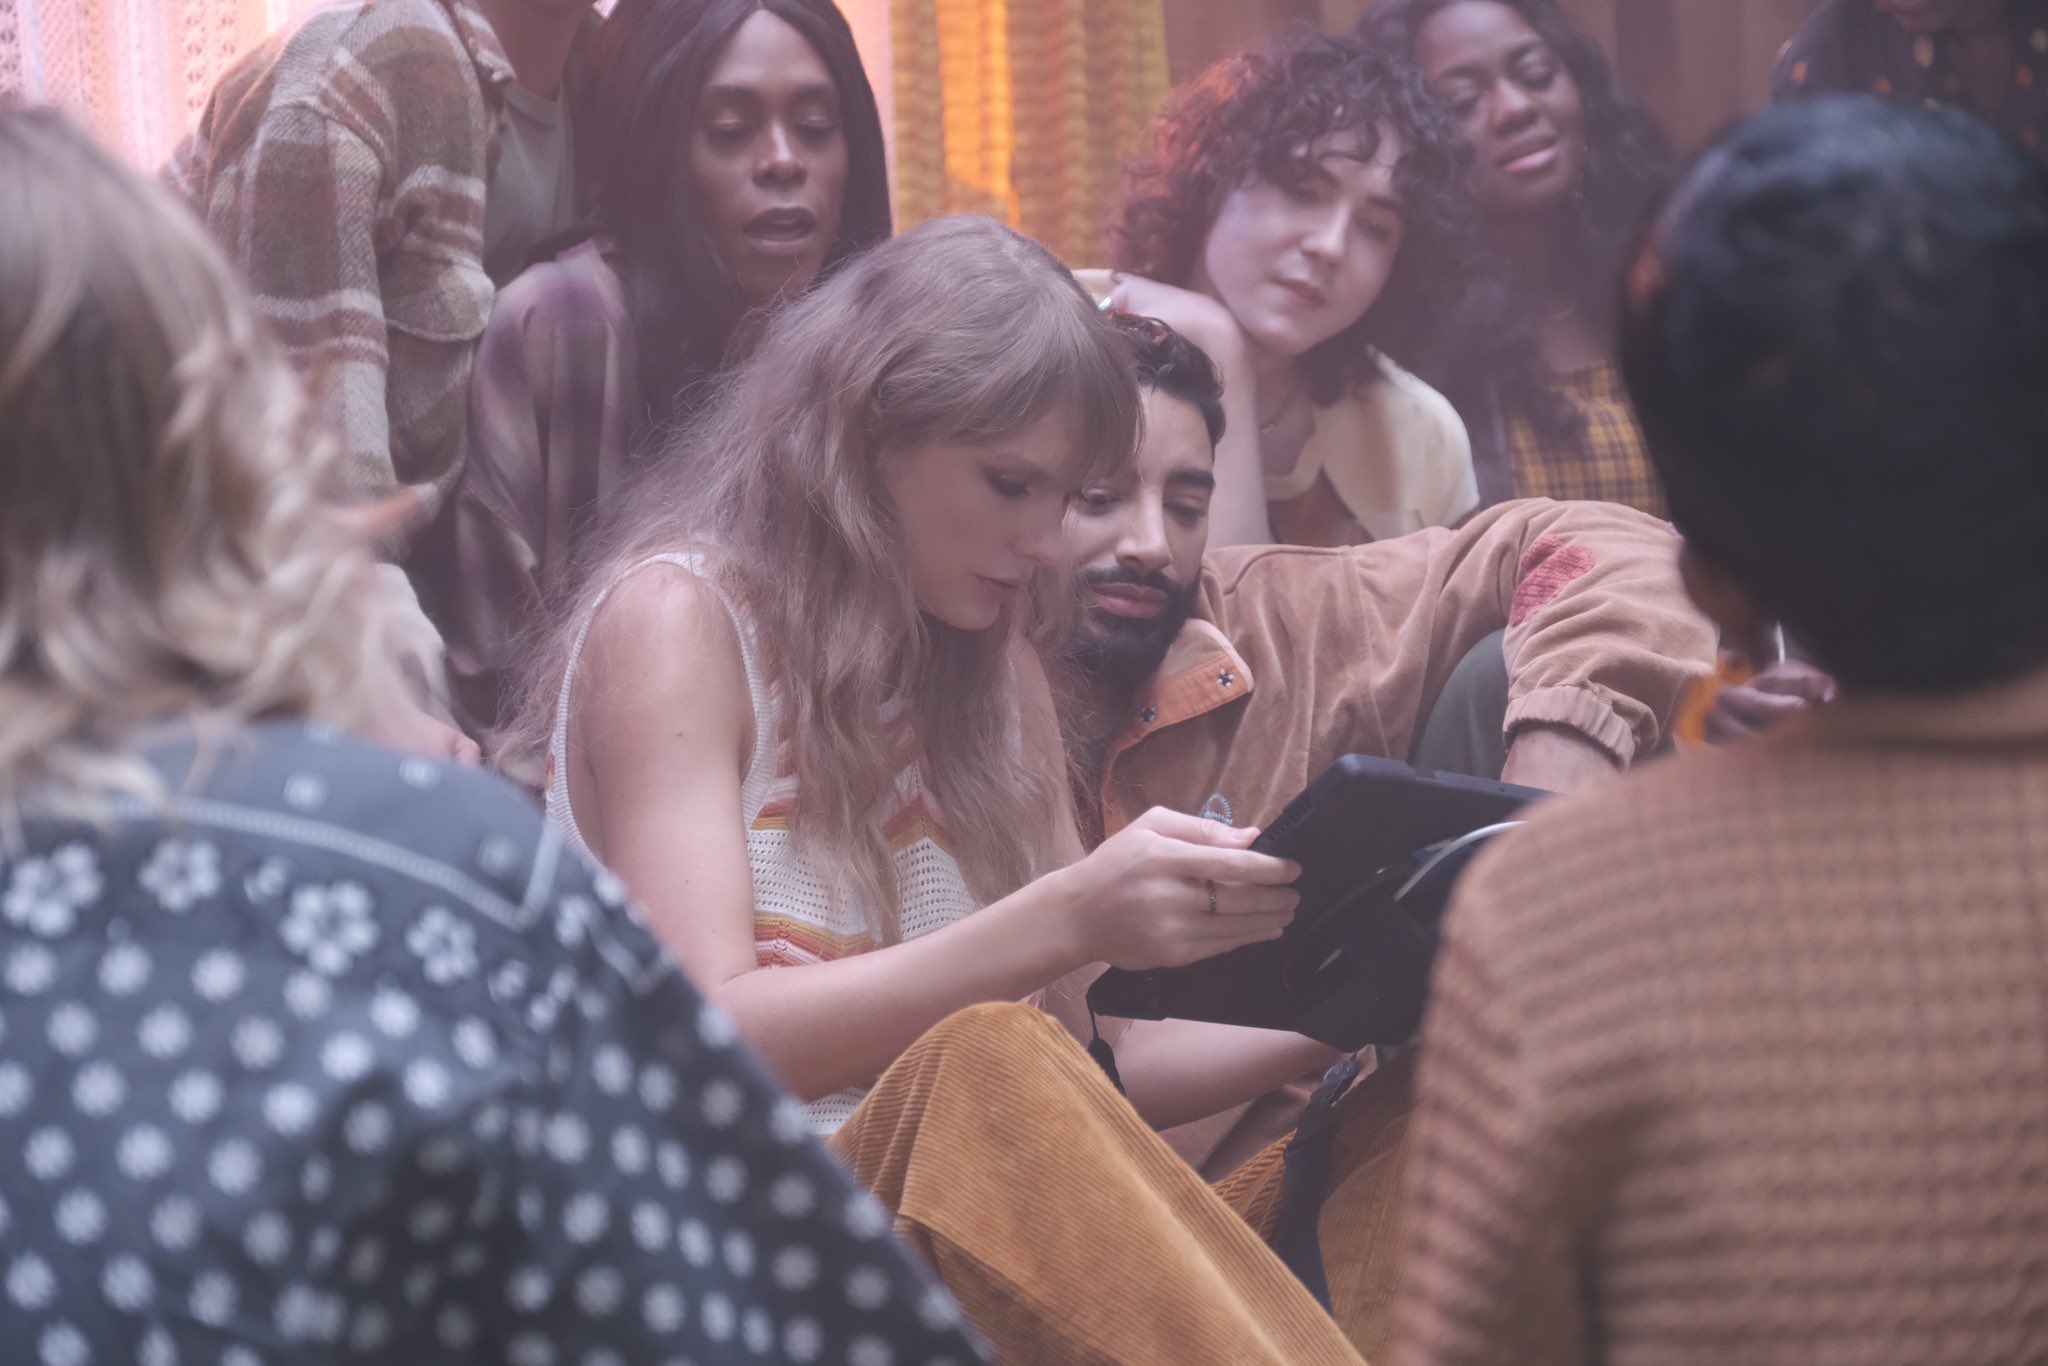 Taylor Swift on X: The Lavender Haze video is out now. There is